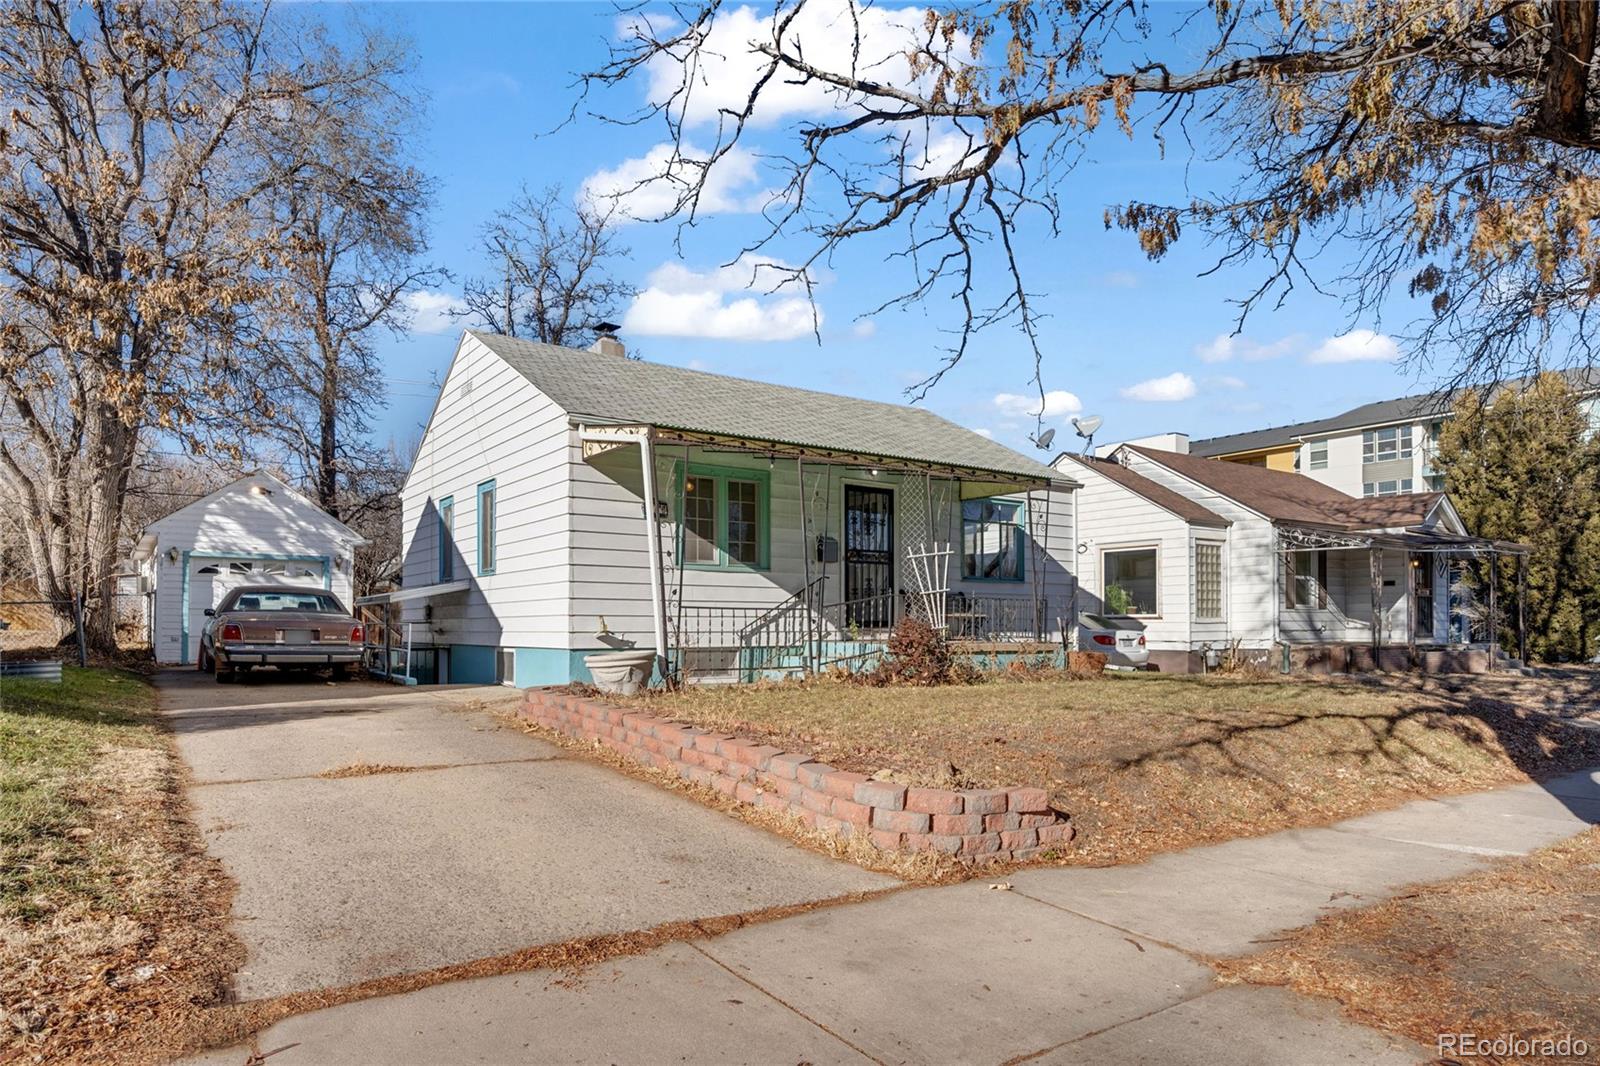 Report Image for 3711 S Sherman Street,Englewood, Colorado